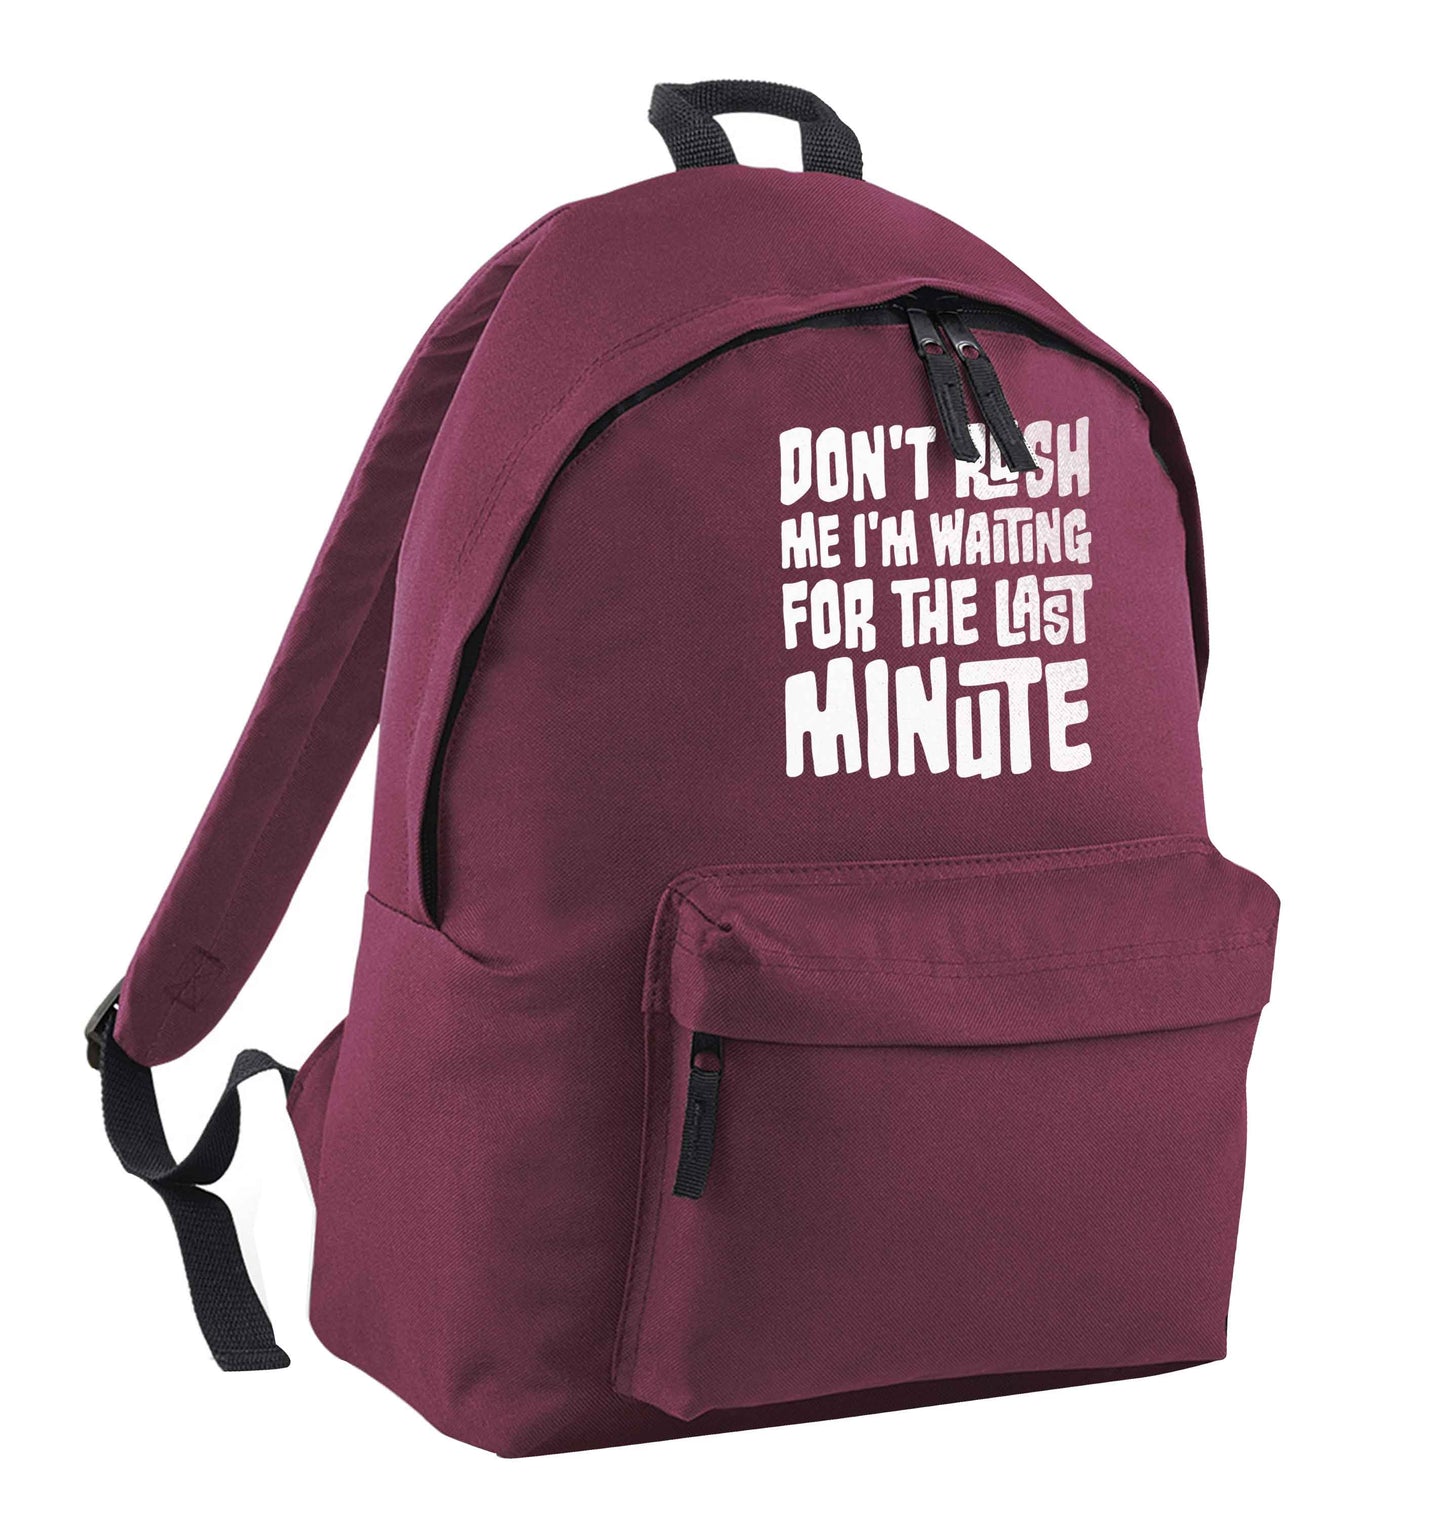 Don't rush me I'm waiting for the last minute maroon children's backpack